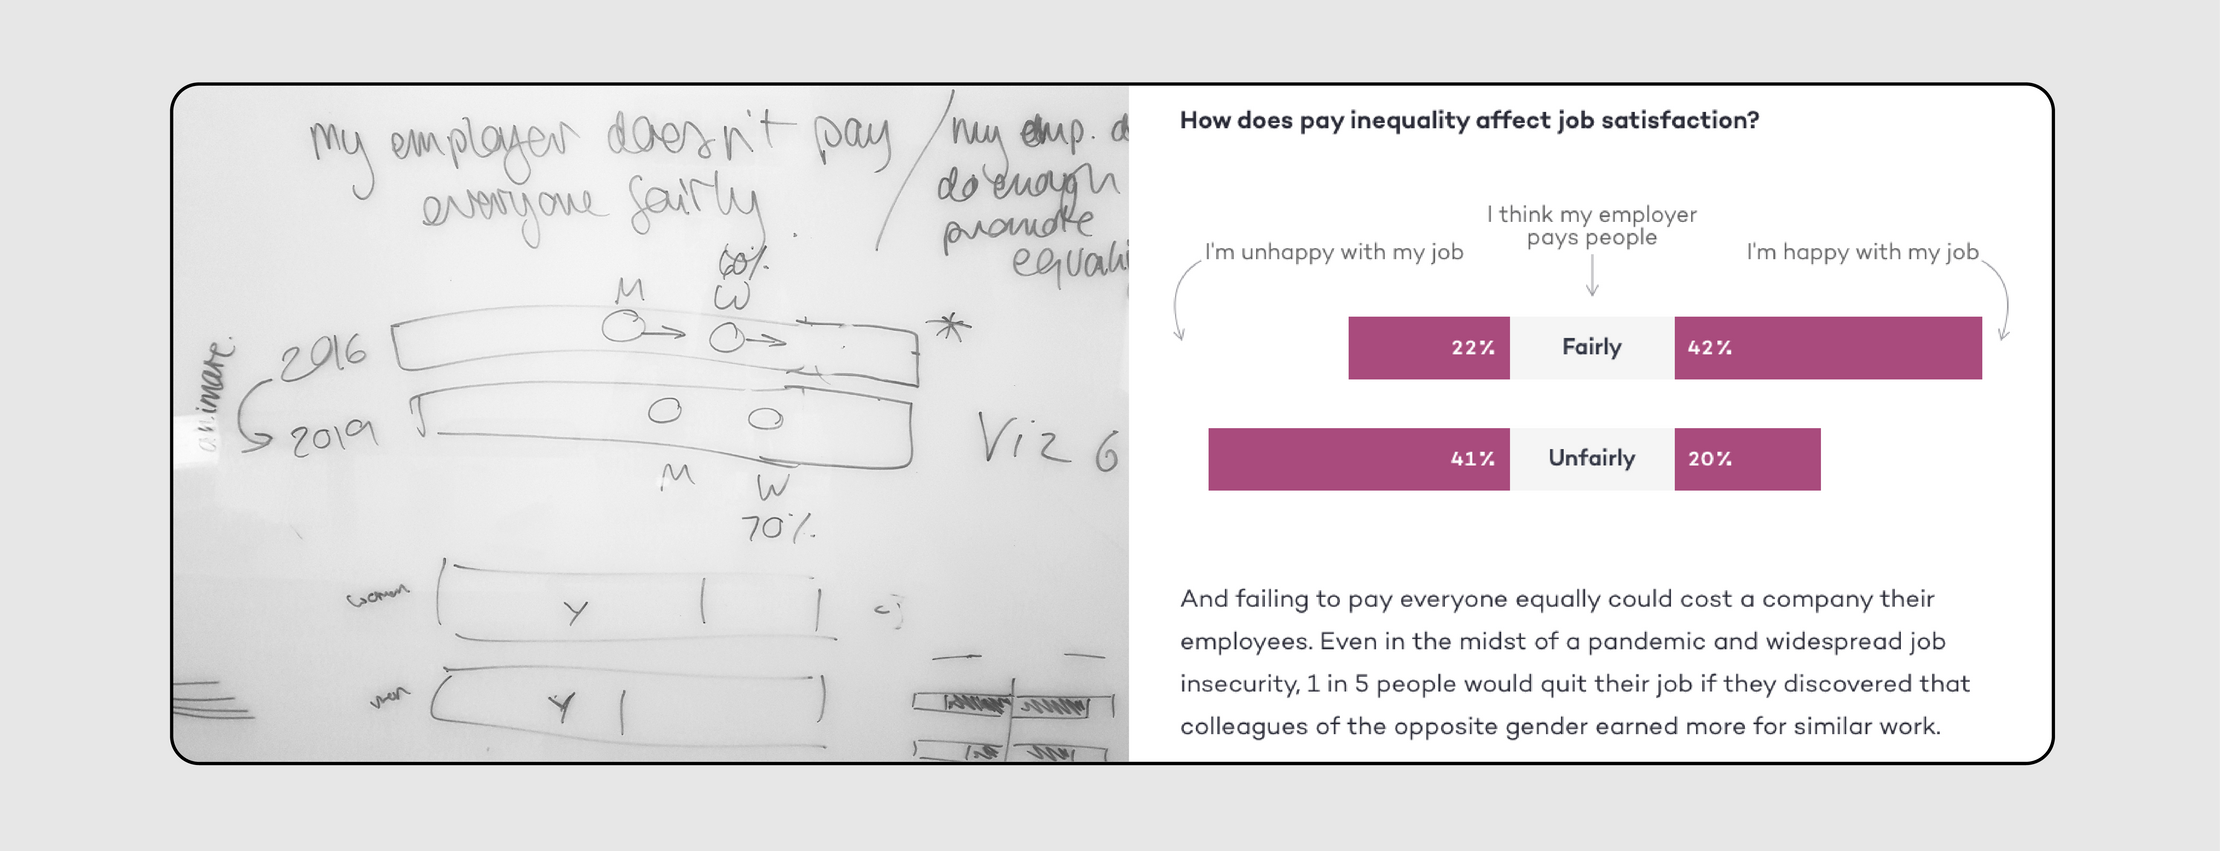 A side by side image of a whiteboard sketch and final image of a butterfly chart about pay inequality and its impact on job satisfaction. It suggests those happy with their job were more likely so say their employer paid fairly than those who didn't like their job.